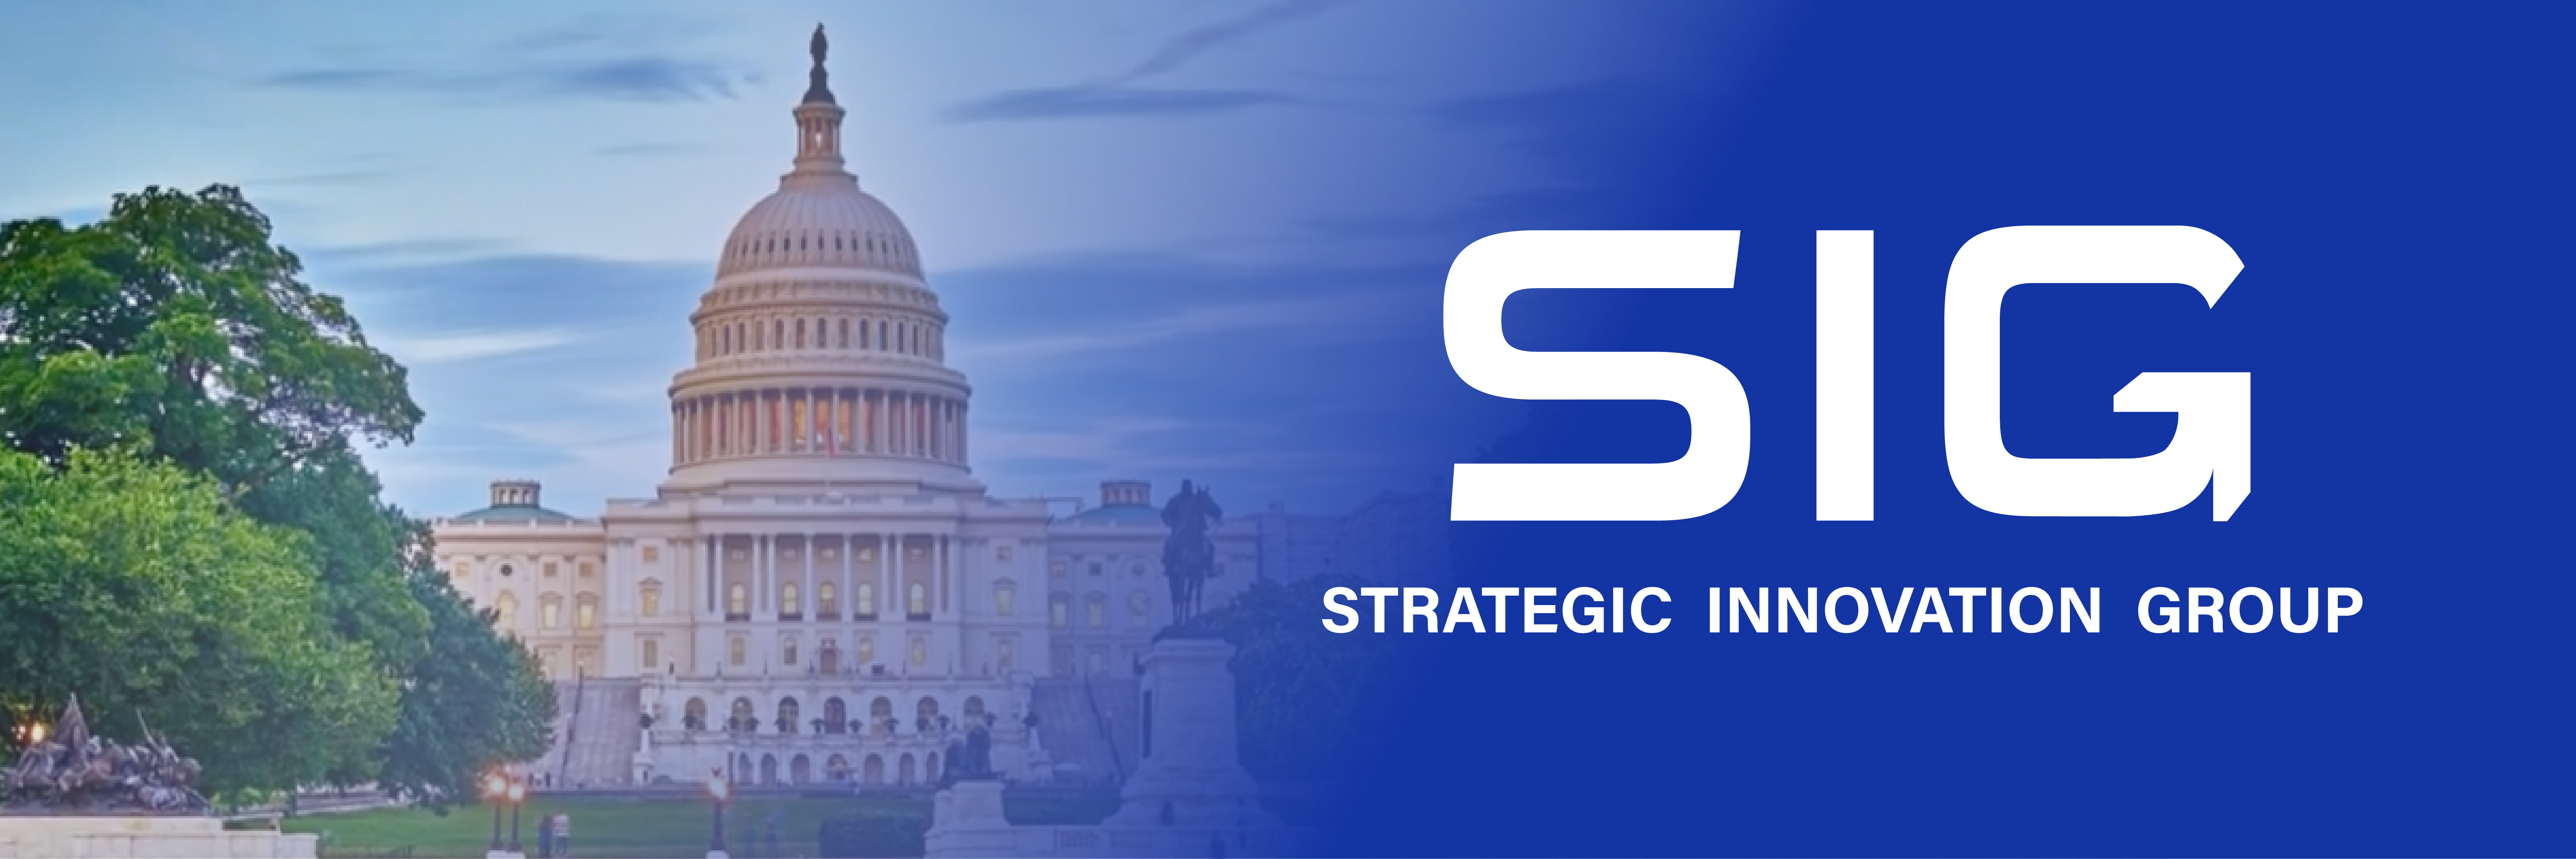 image of the Capitol and SIG logo on blue background